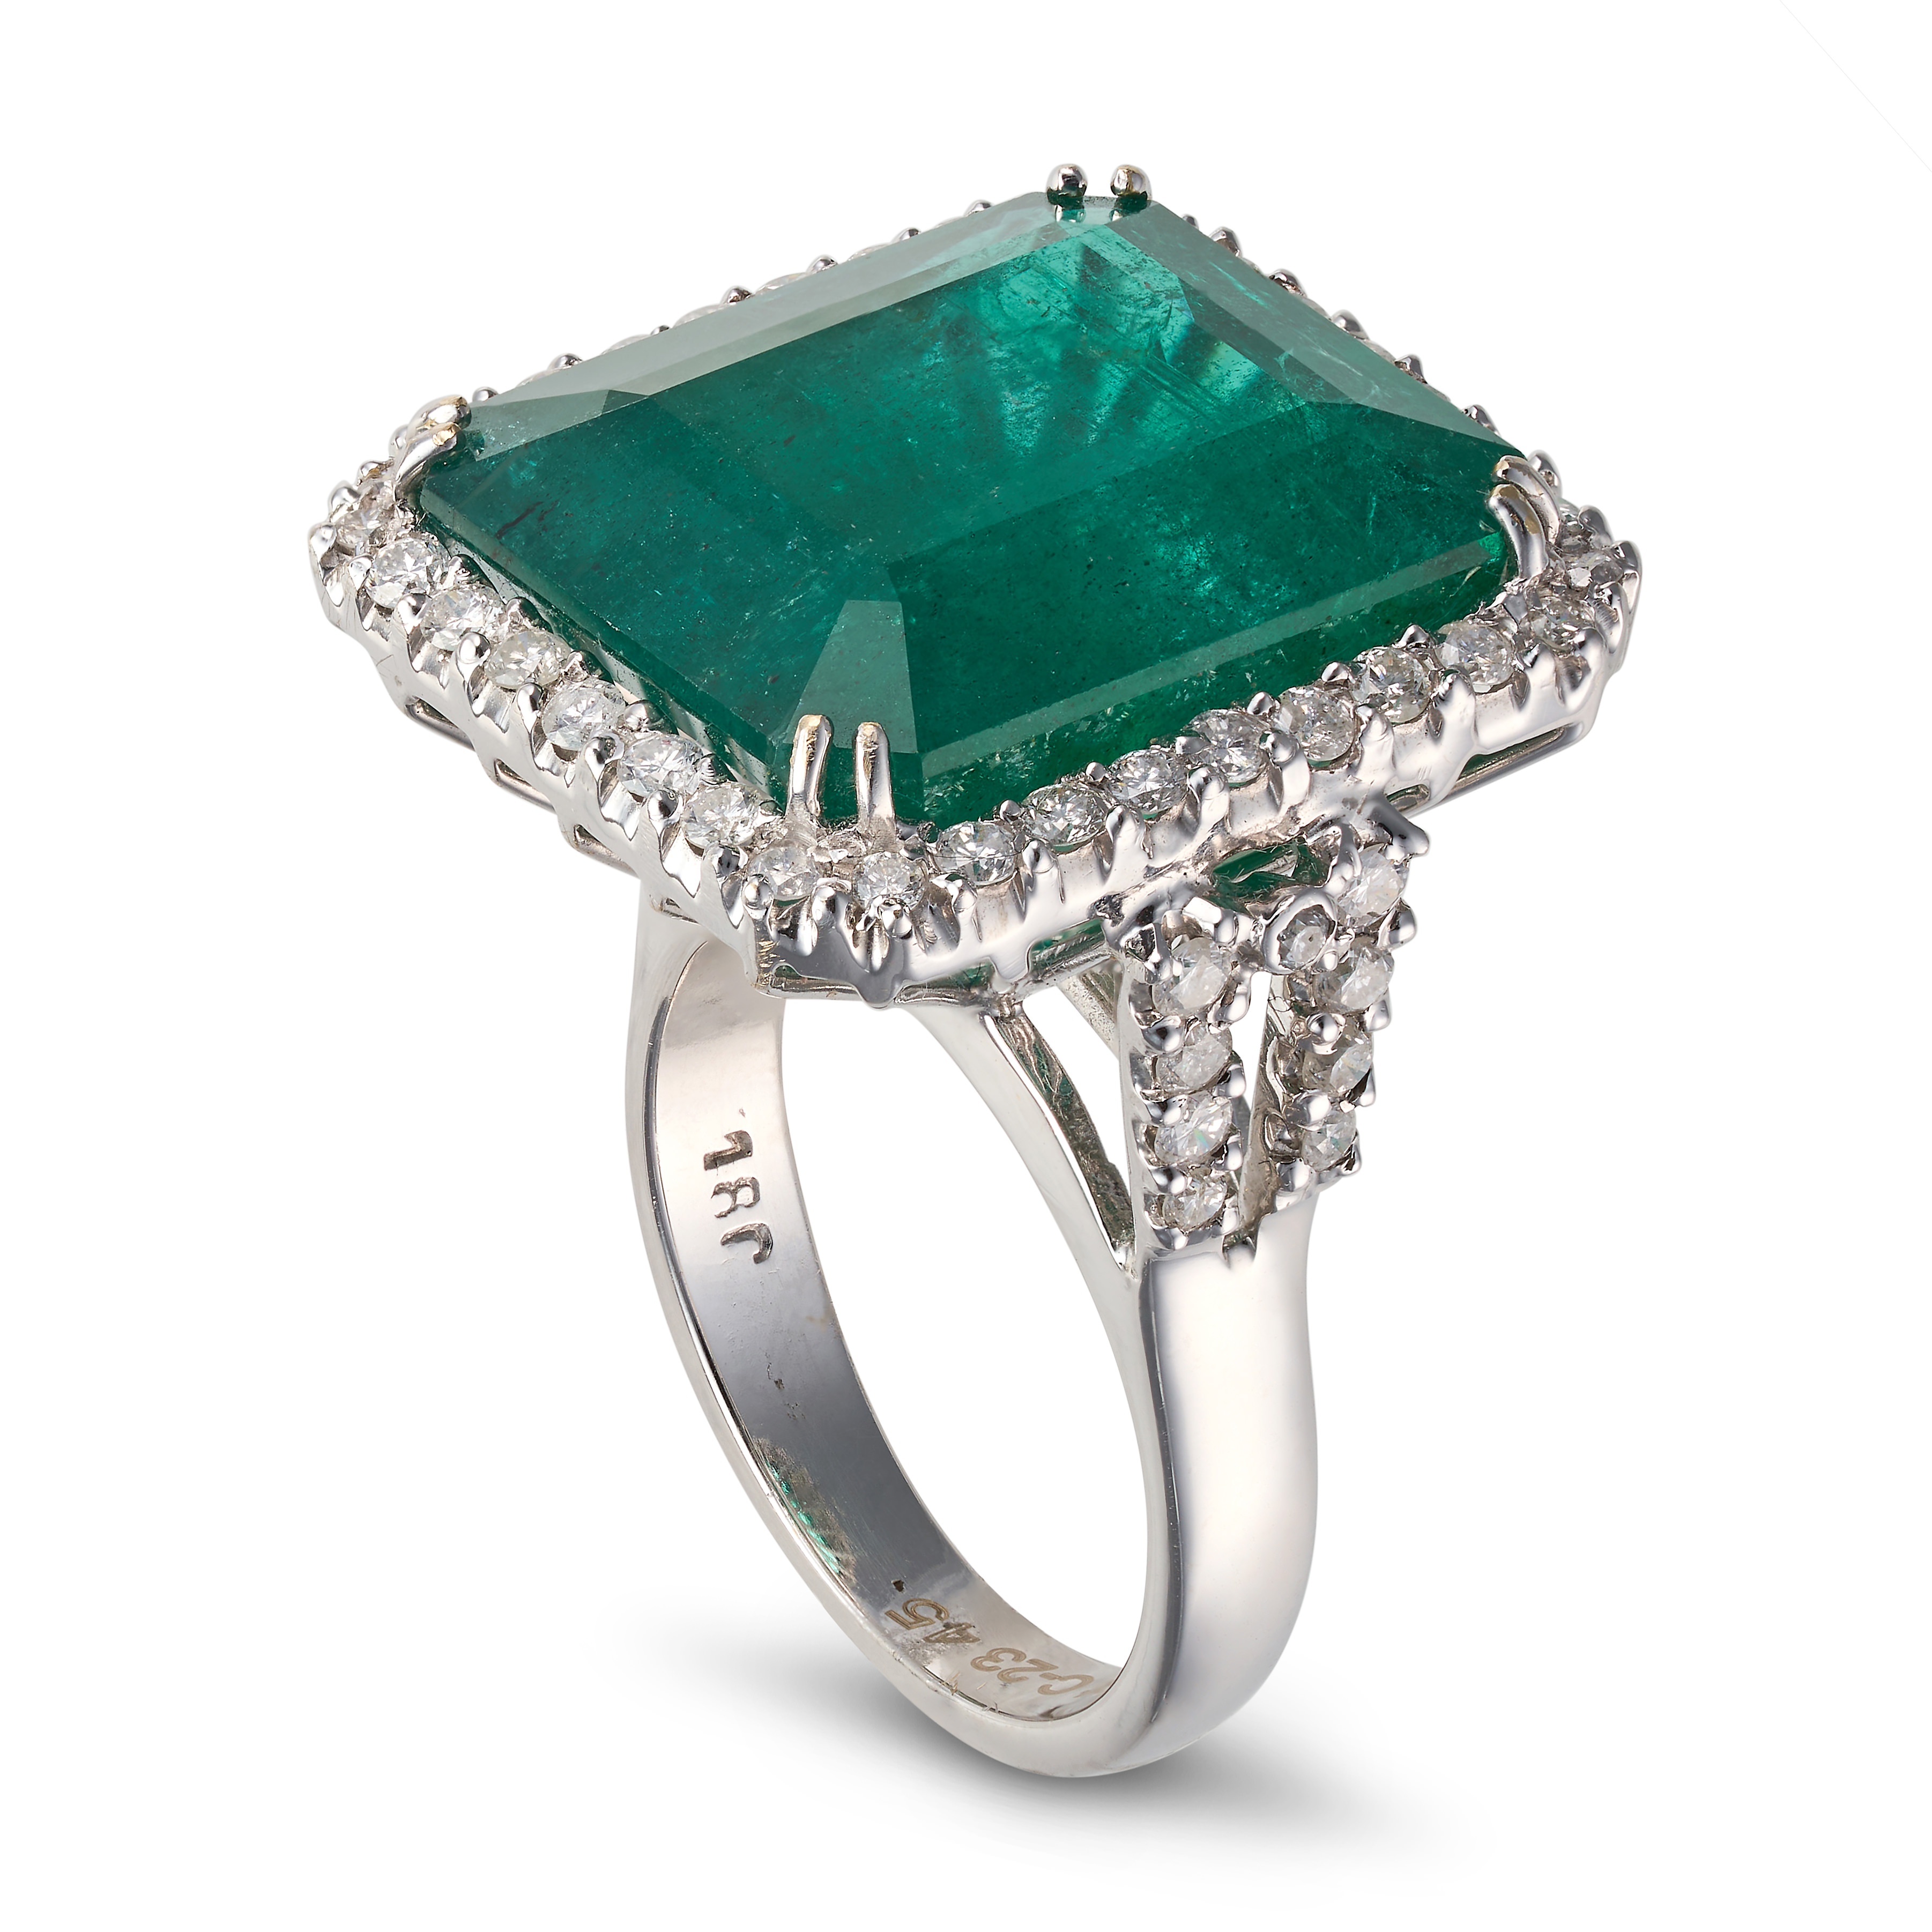 AN EMERALD AND DIAMOND RING set with an octagonal step cut emerald of 23.45 carats in a border of... - Image 2 of 2